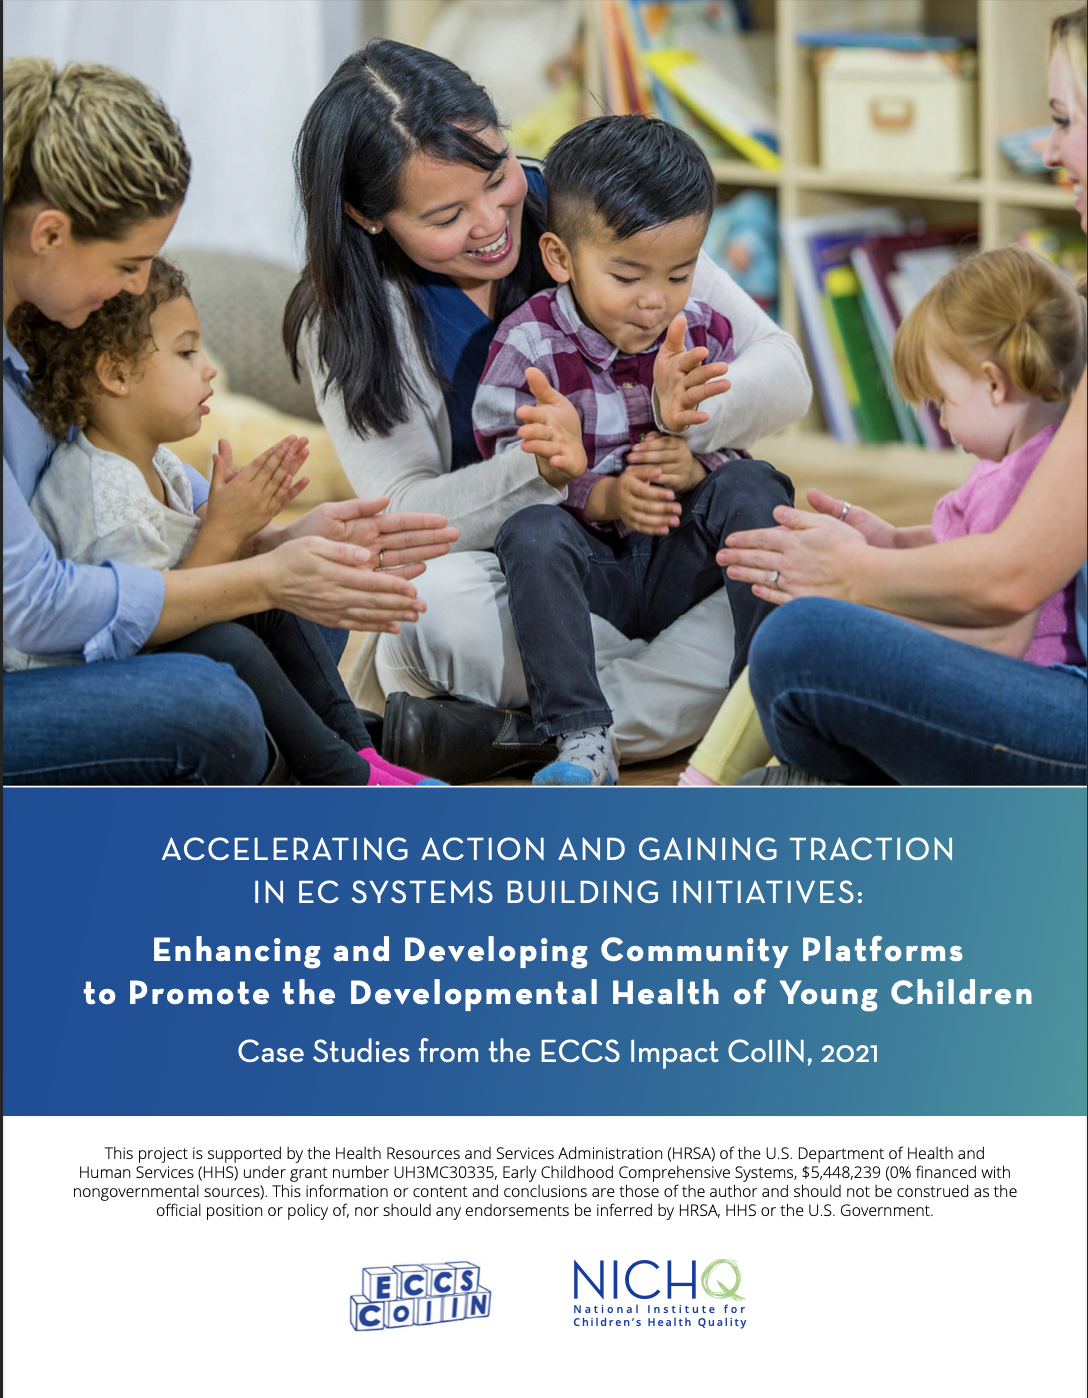 Enhancing and Developing Community Platforms to Promote the Developmental Health of Young Children